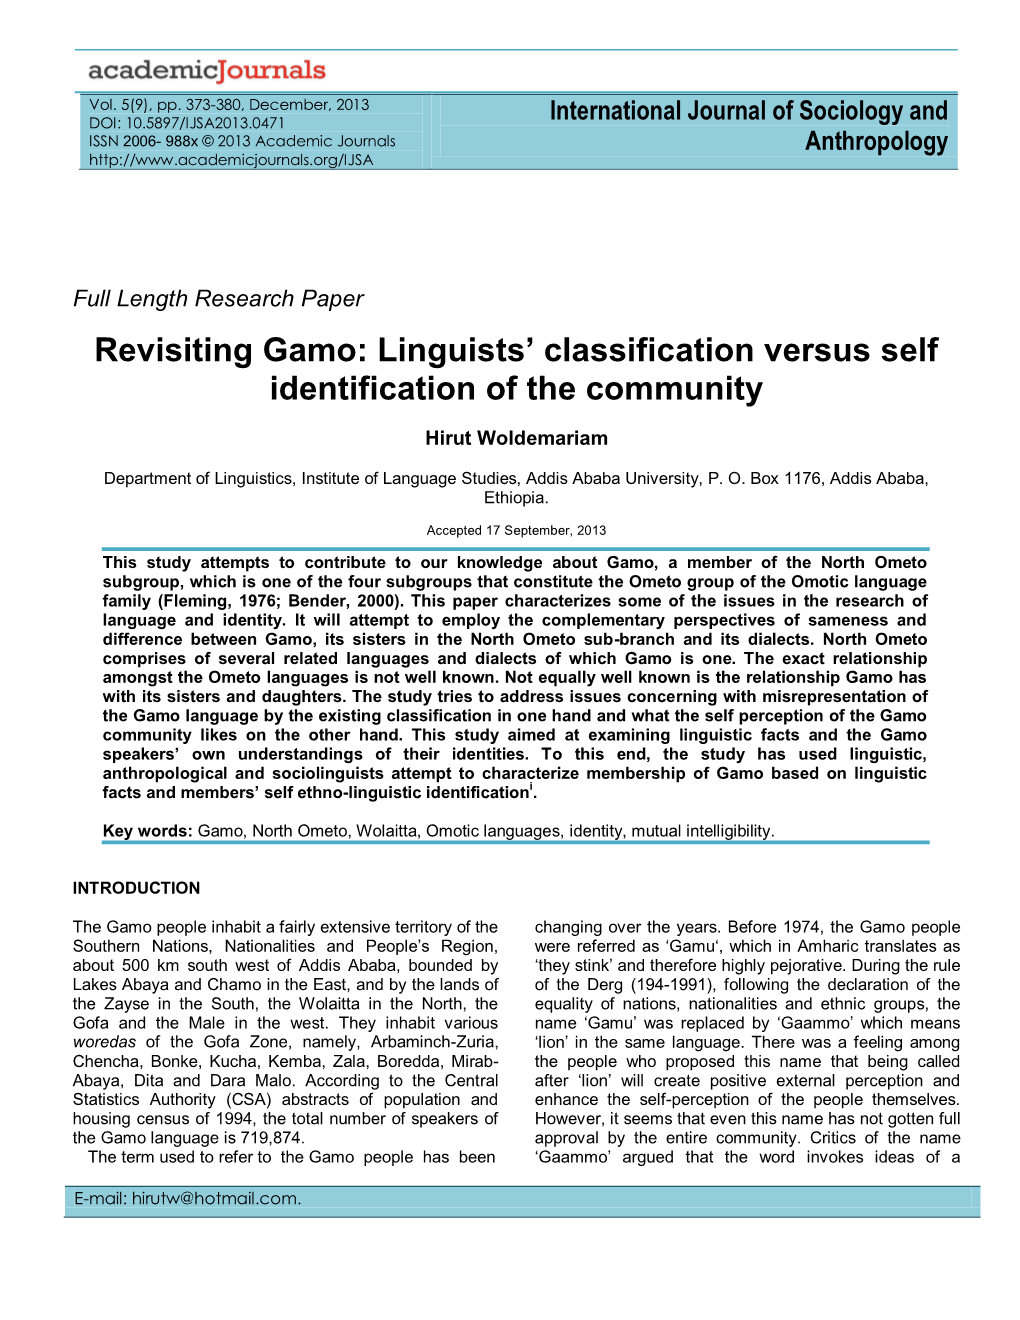 Revisiting Gamo: Linguists’ Classification Versus Self Identification of the Community